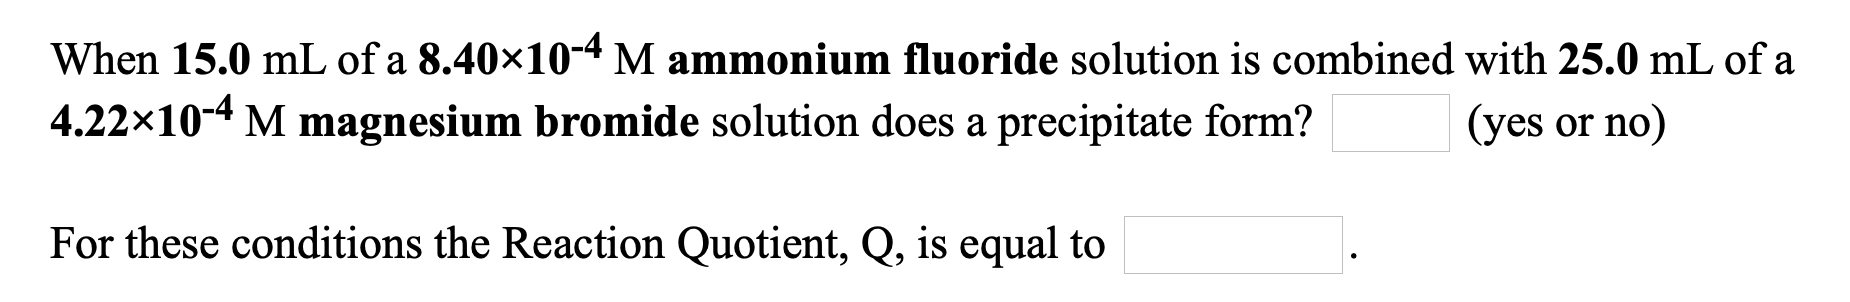 When 15.0 mL of a 8.40×10-4 M ammonium fluoride solution is combined with 25.0 mL of a
4.22x10-4 M magnesium bromide solution does a precipitate form?
(yes or no)
For these conditions the Reaction Quotient, Q, is equal to
